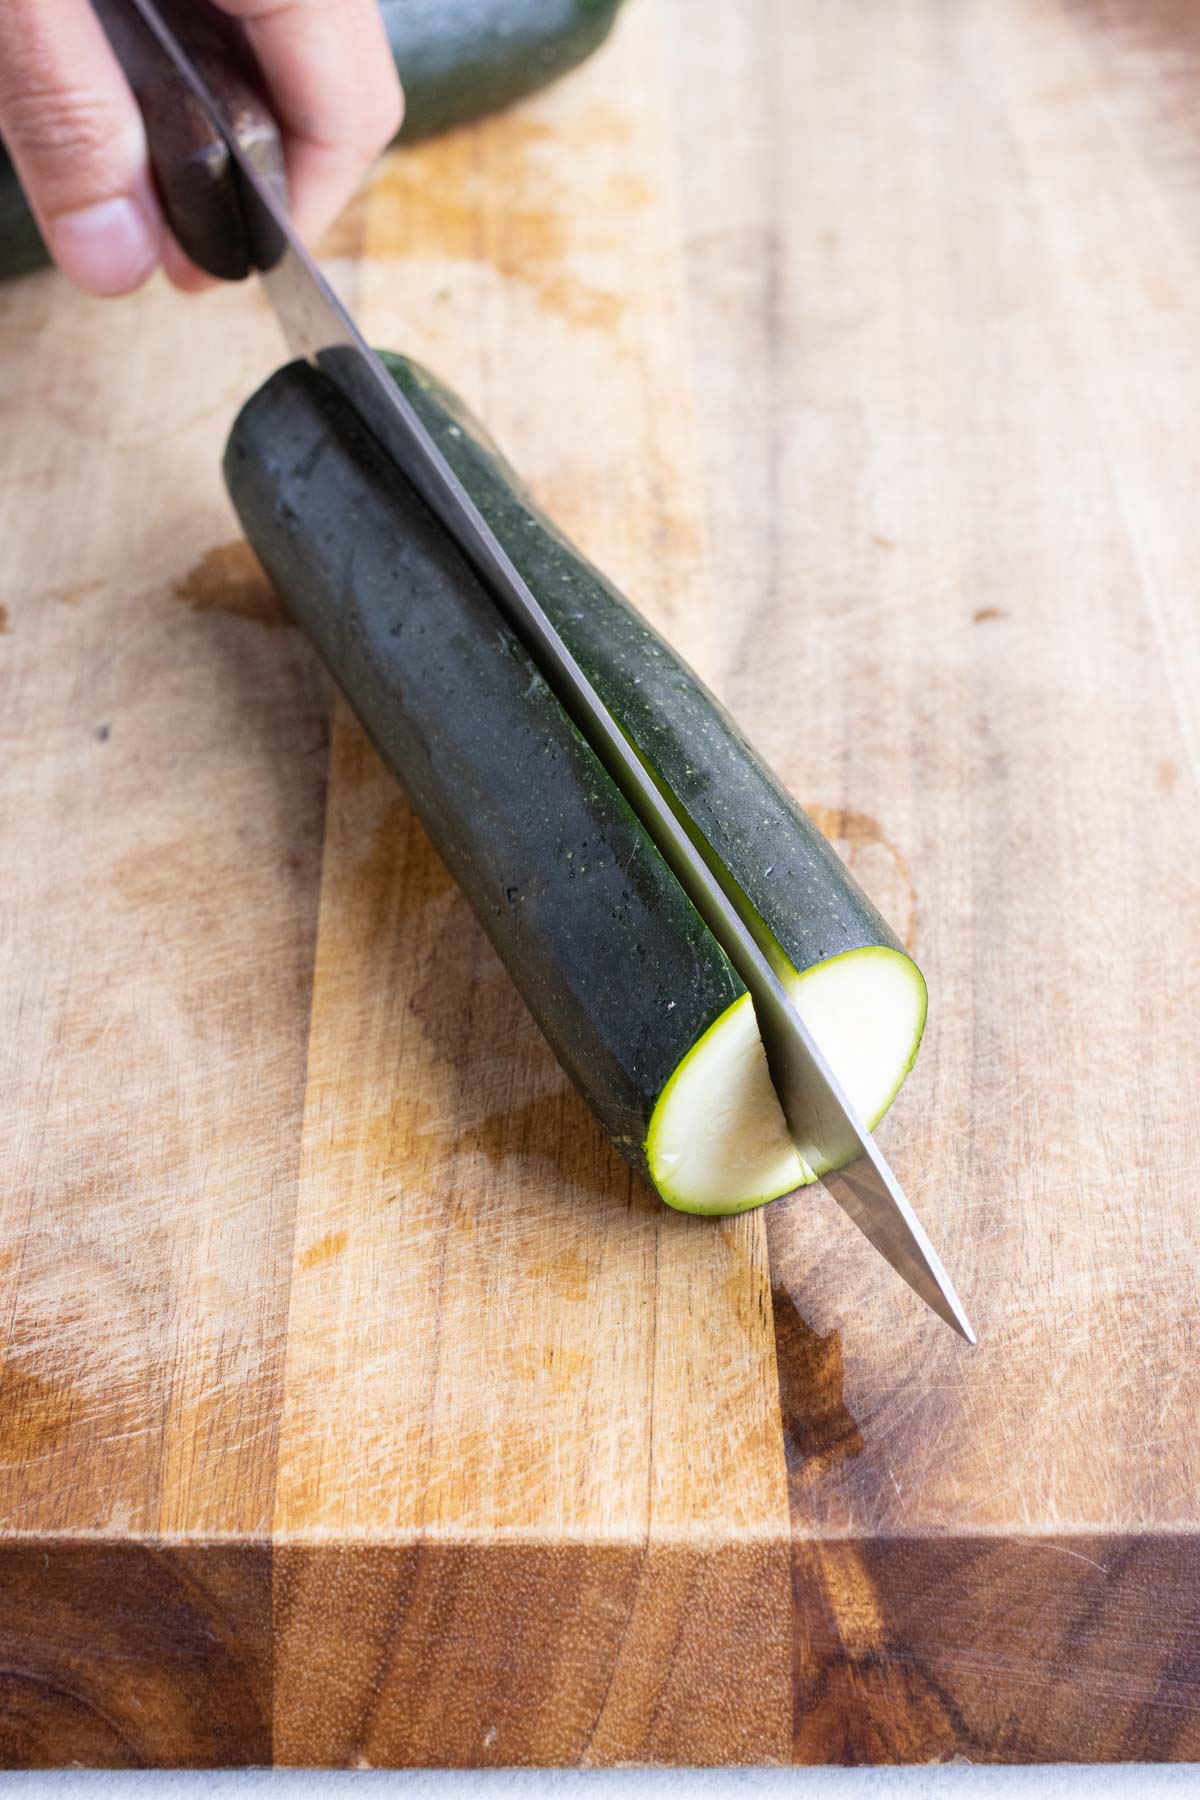 Showing how to slice a zucchini in half.